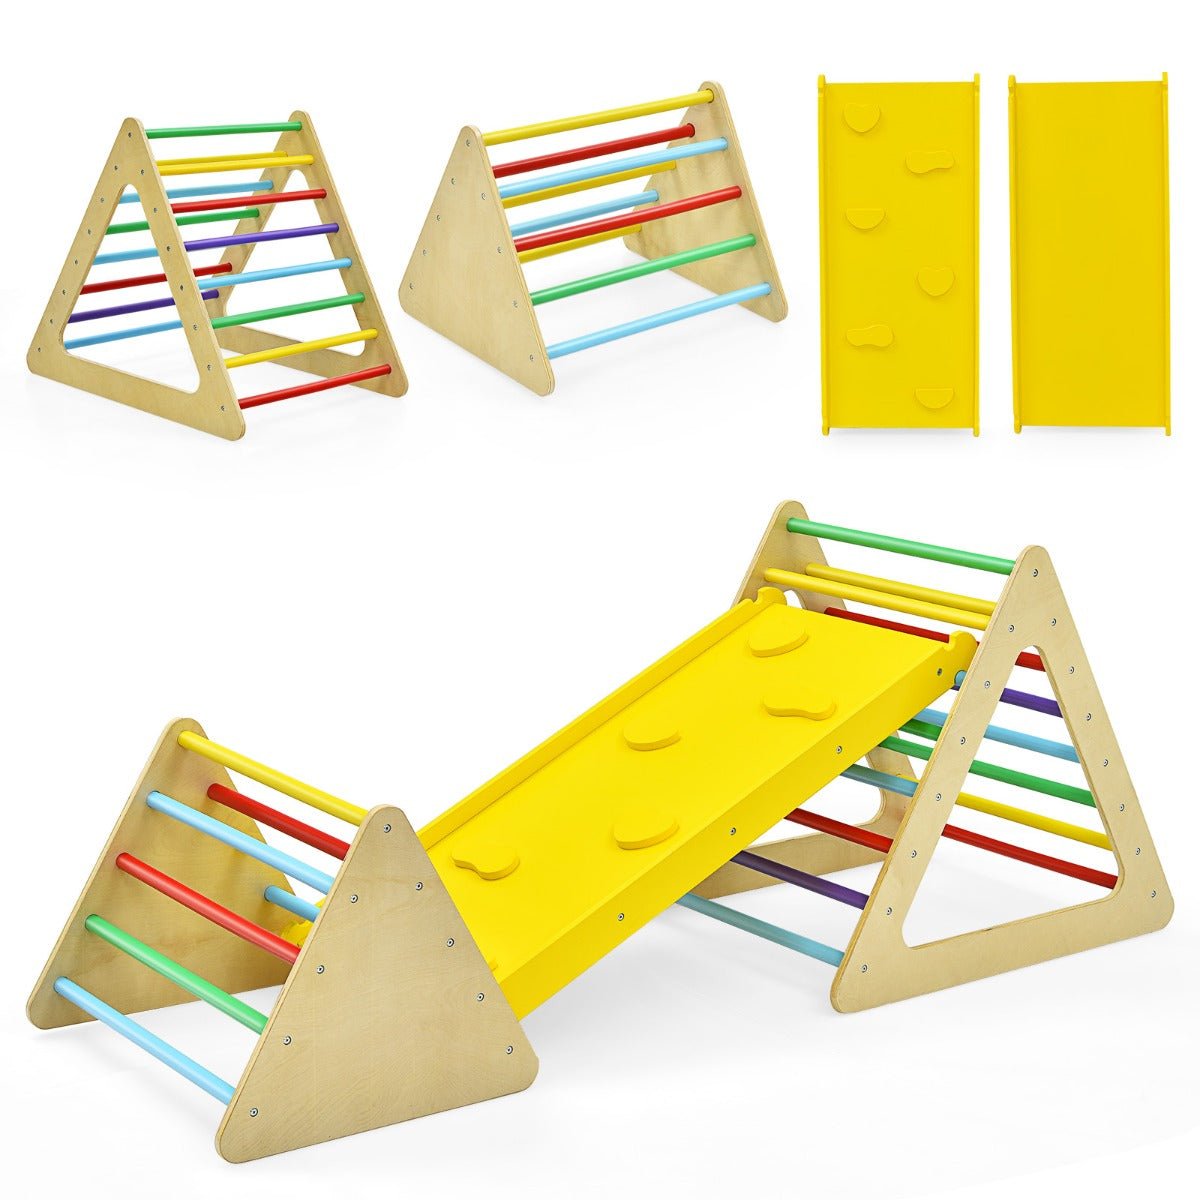 Kid-Friendly 3 in 1 Climbing Toy - Triangle Ladders & Ramp Adventure